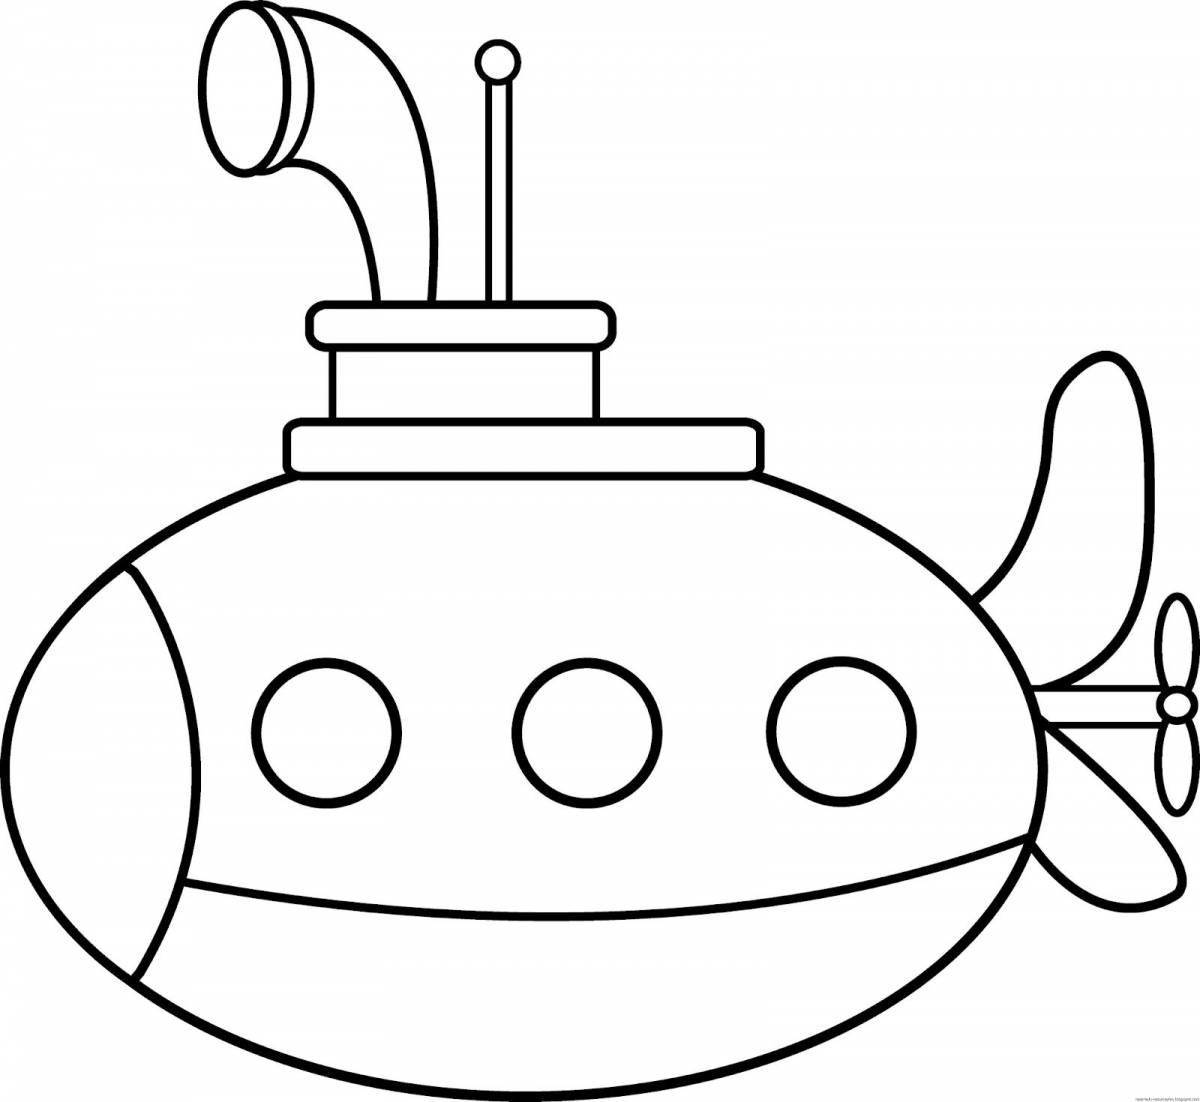 Exquisite submarine coloring book for 5-6 year olds